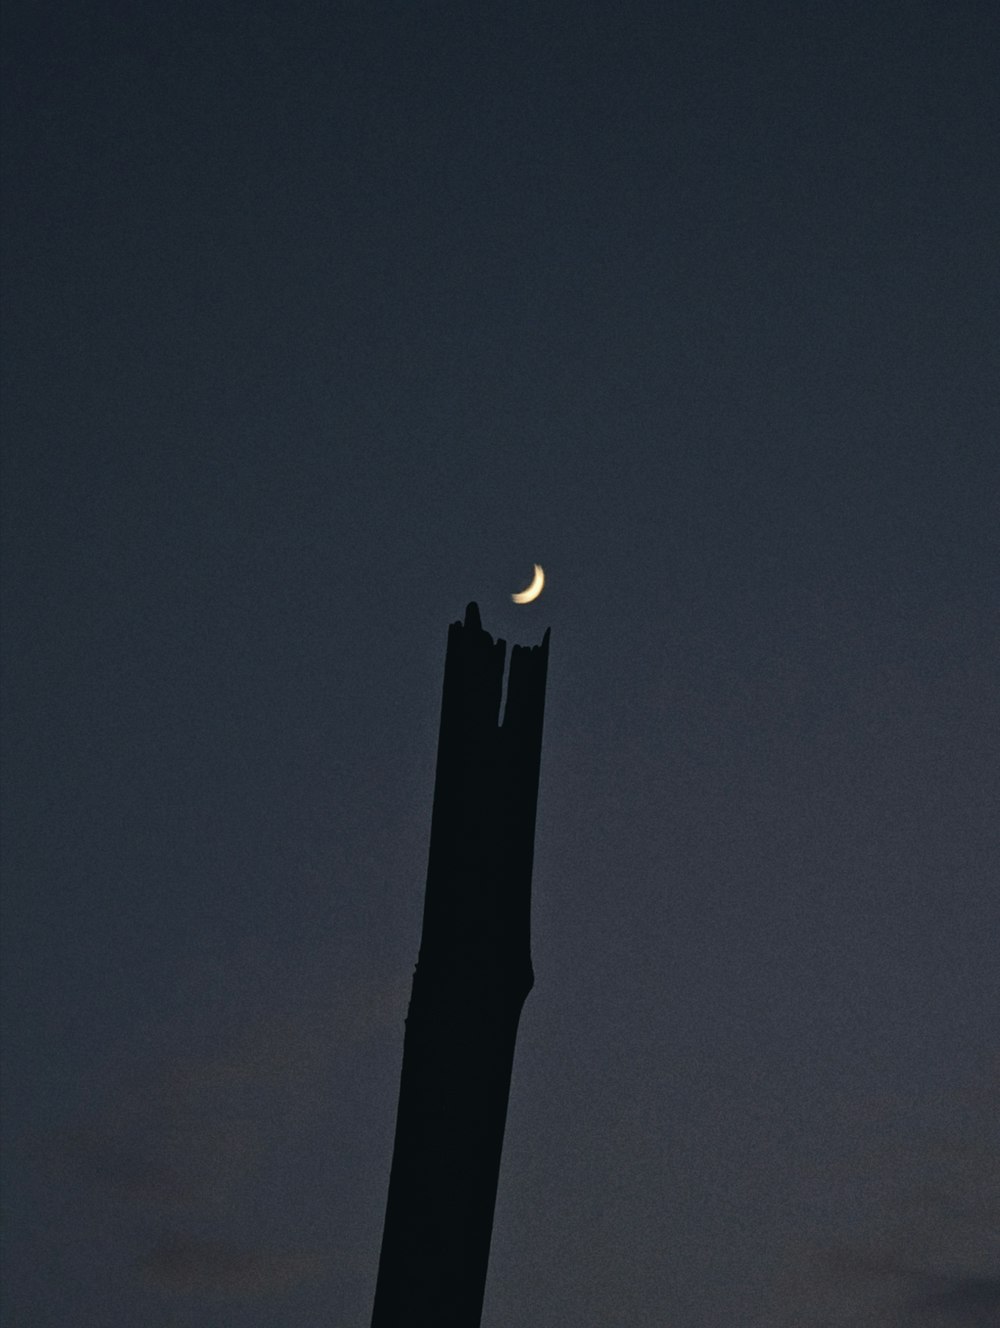 the moon is setting behind a tall tower